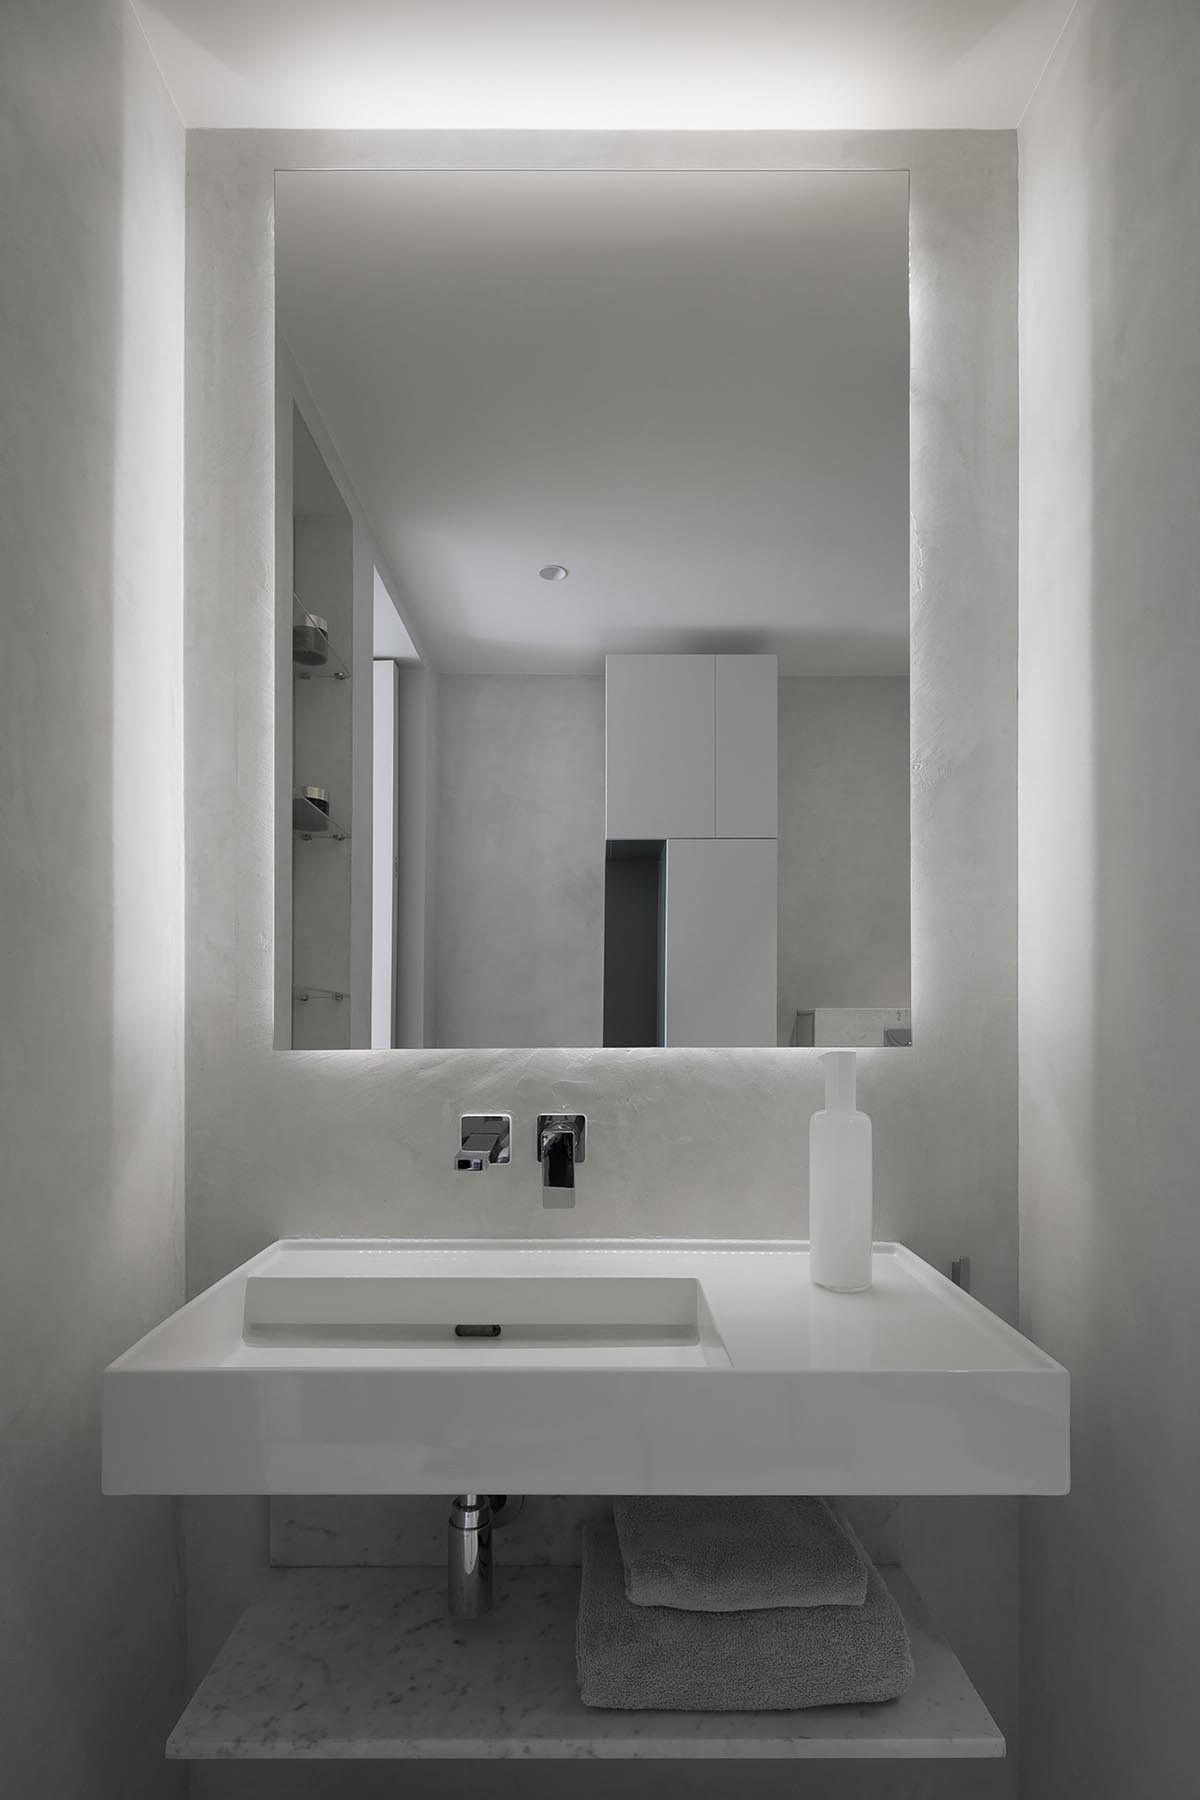 This white master bathroom combines Carrara marble and functional concrete for a contemporary feel.